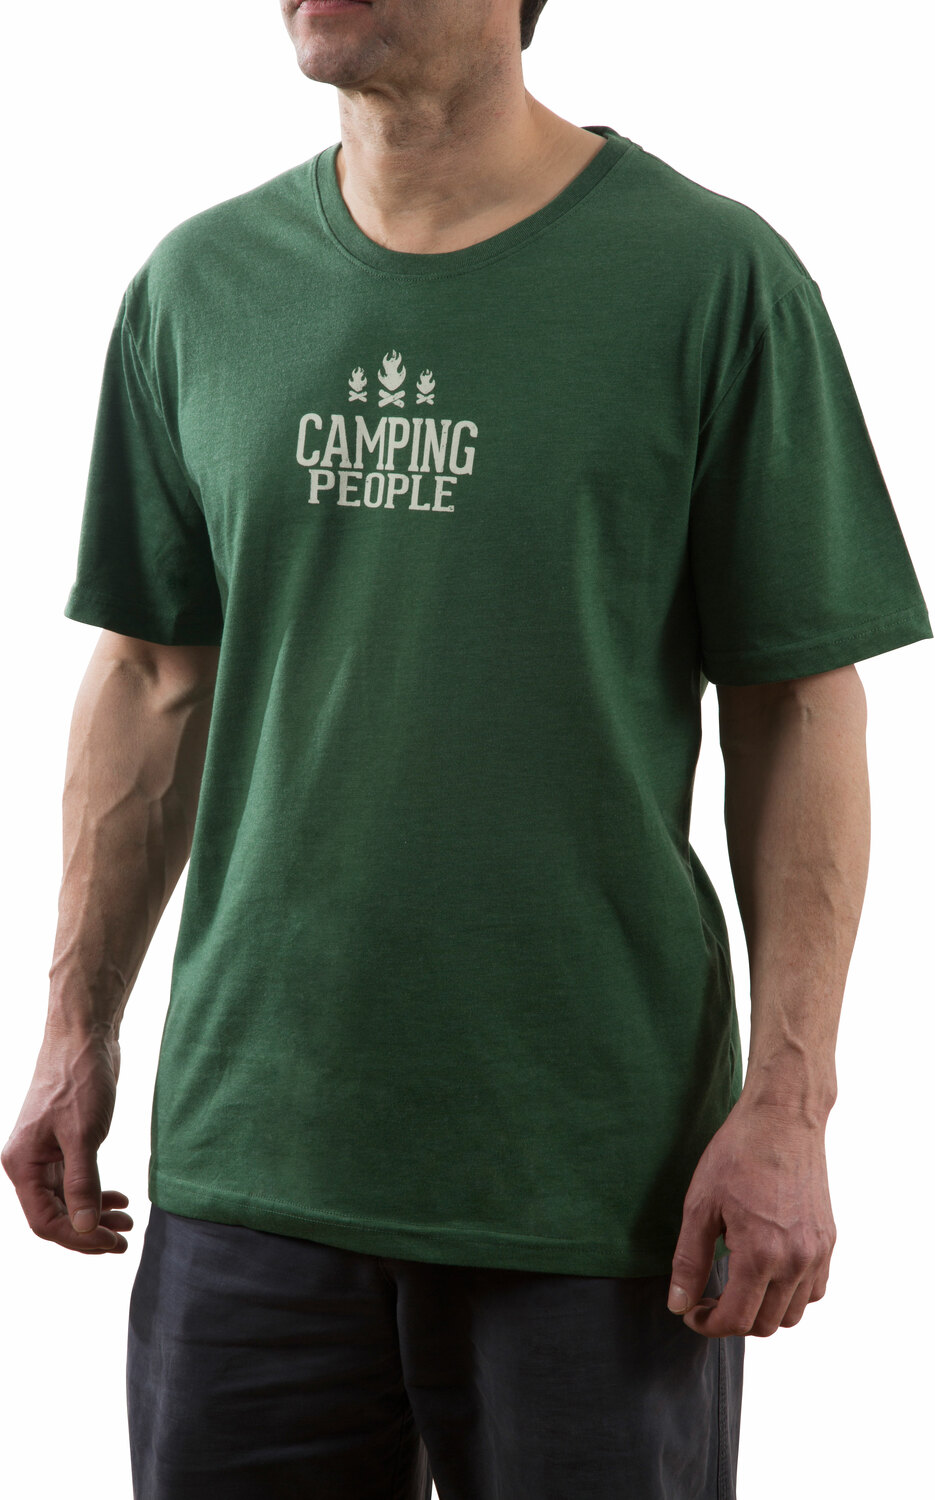 Camping People by We People - Camping People - Small Green Unisex T-Shirt